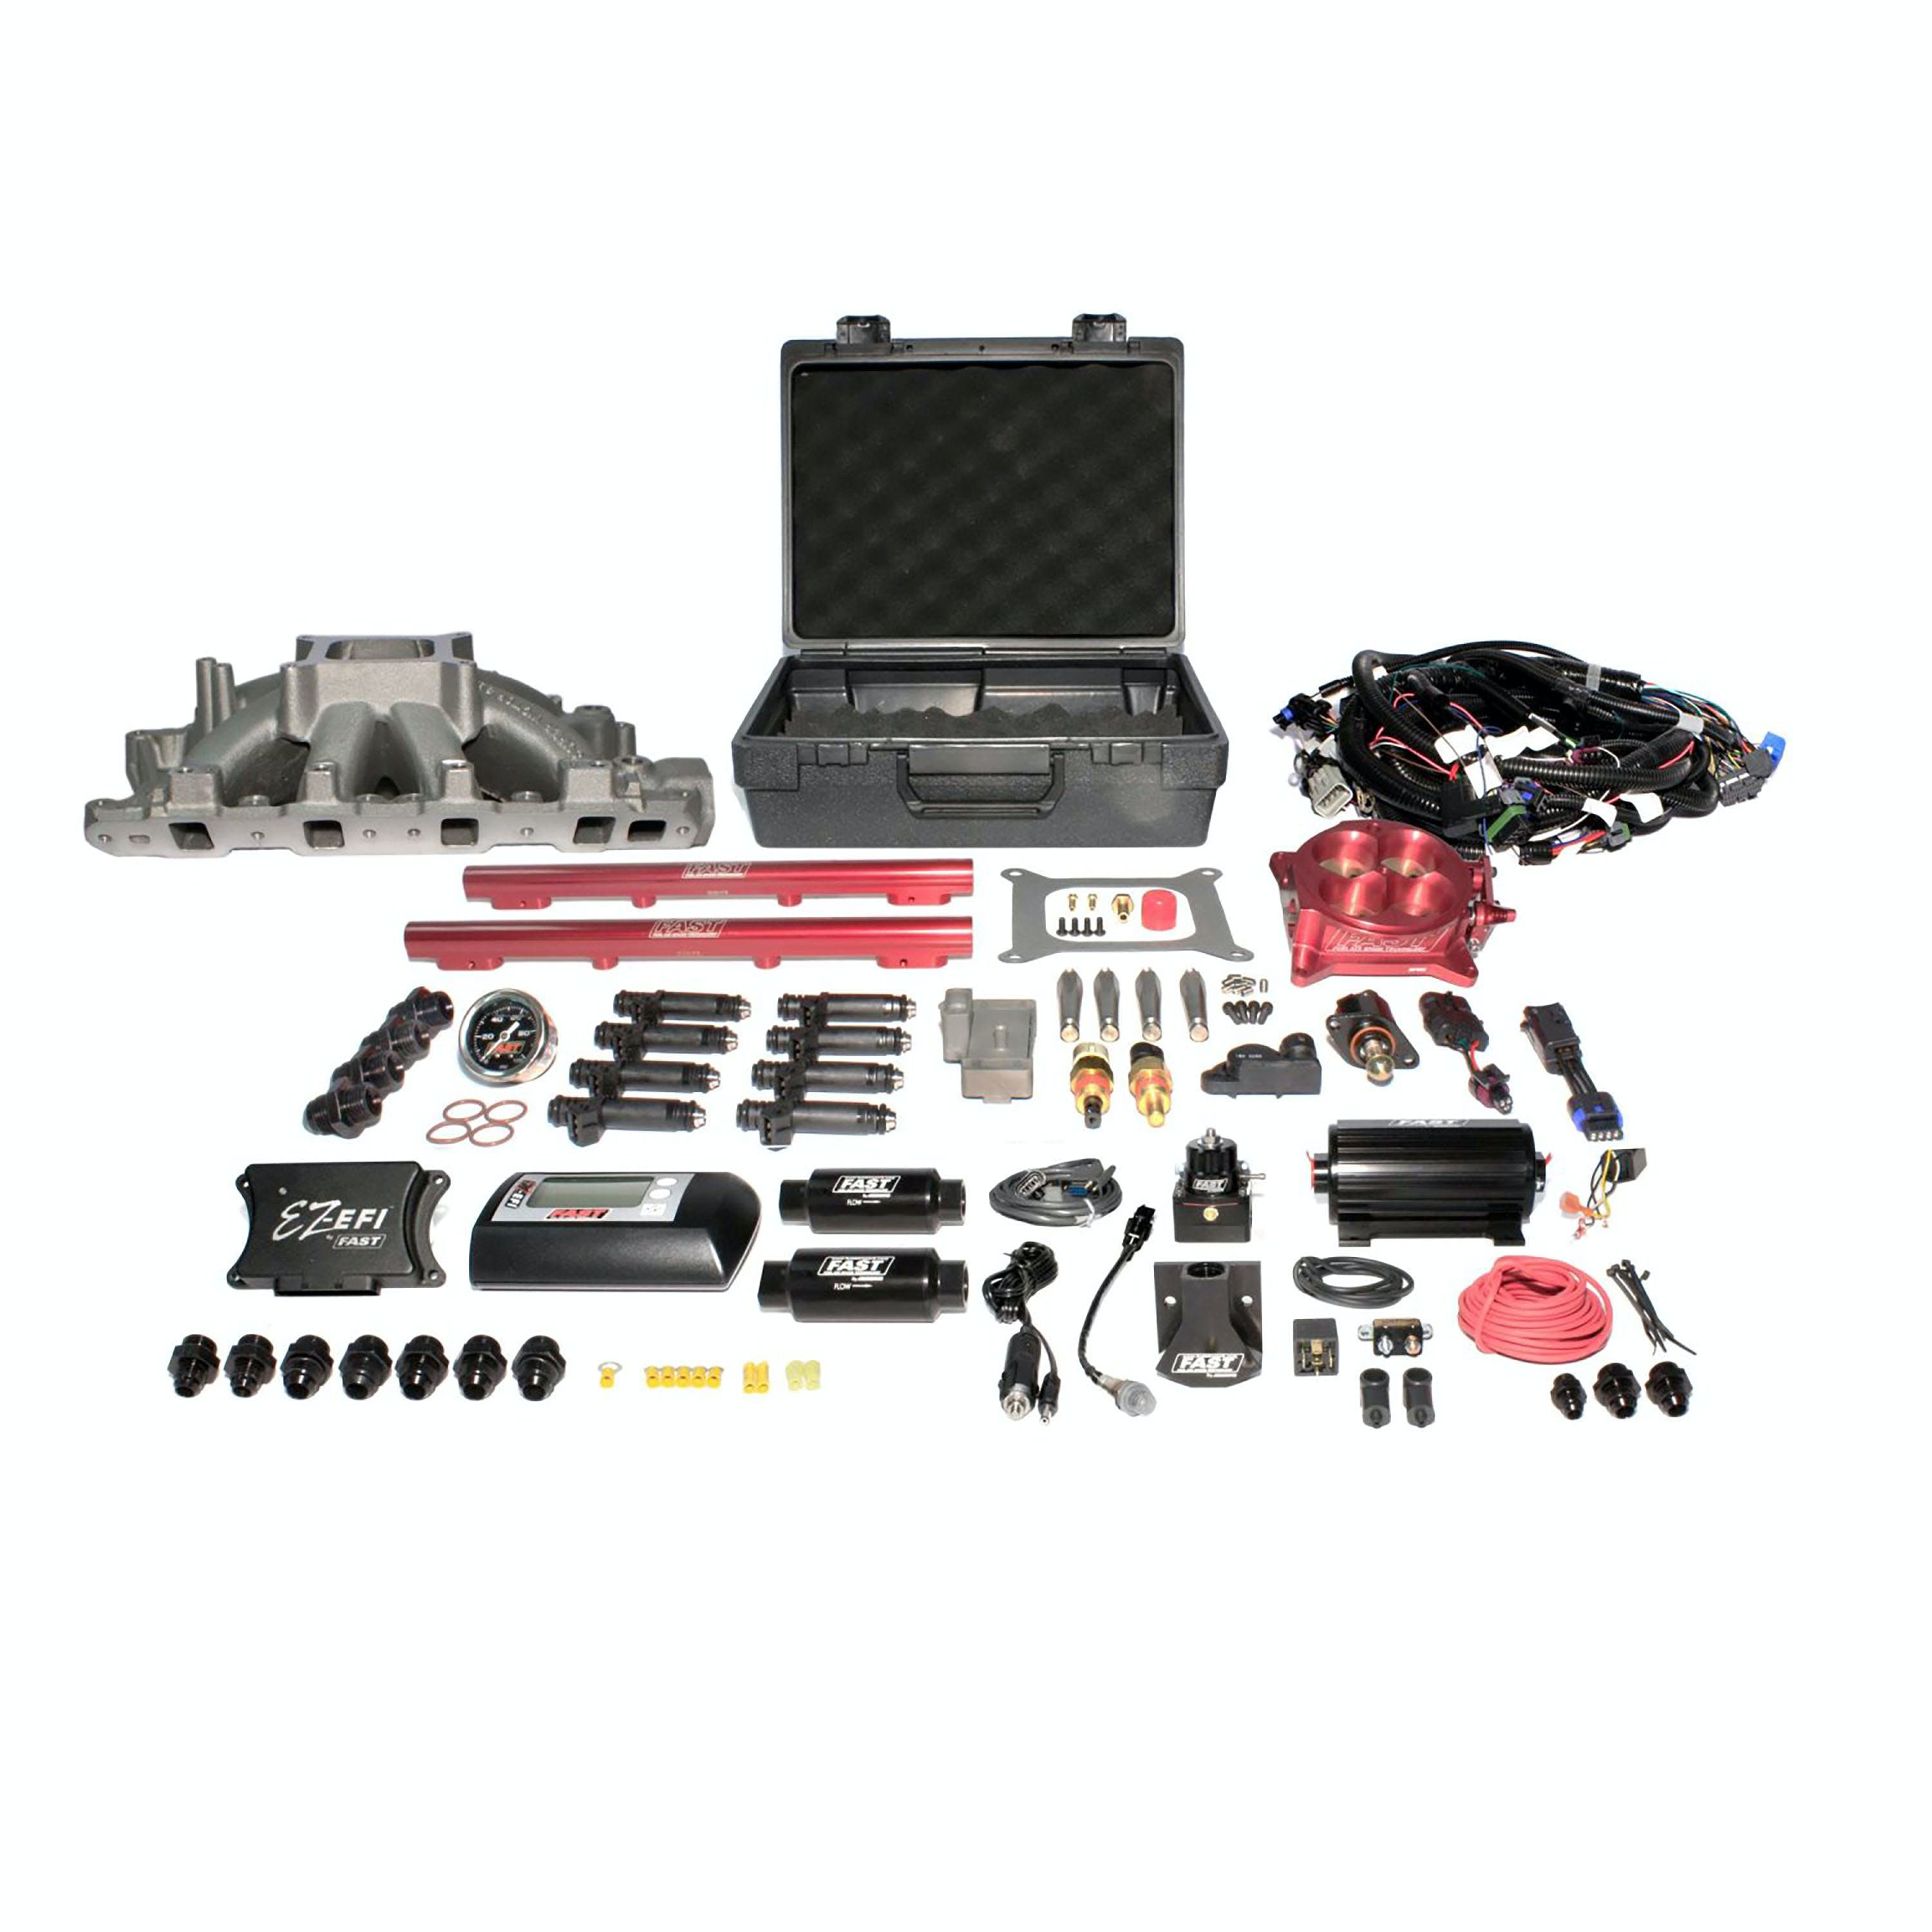 FAST - Fuel Air Spark Technology 3031302-10E EZ EFI SBF Multiport System w/ Intake, Fuel System and Red Throttle Body